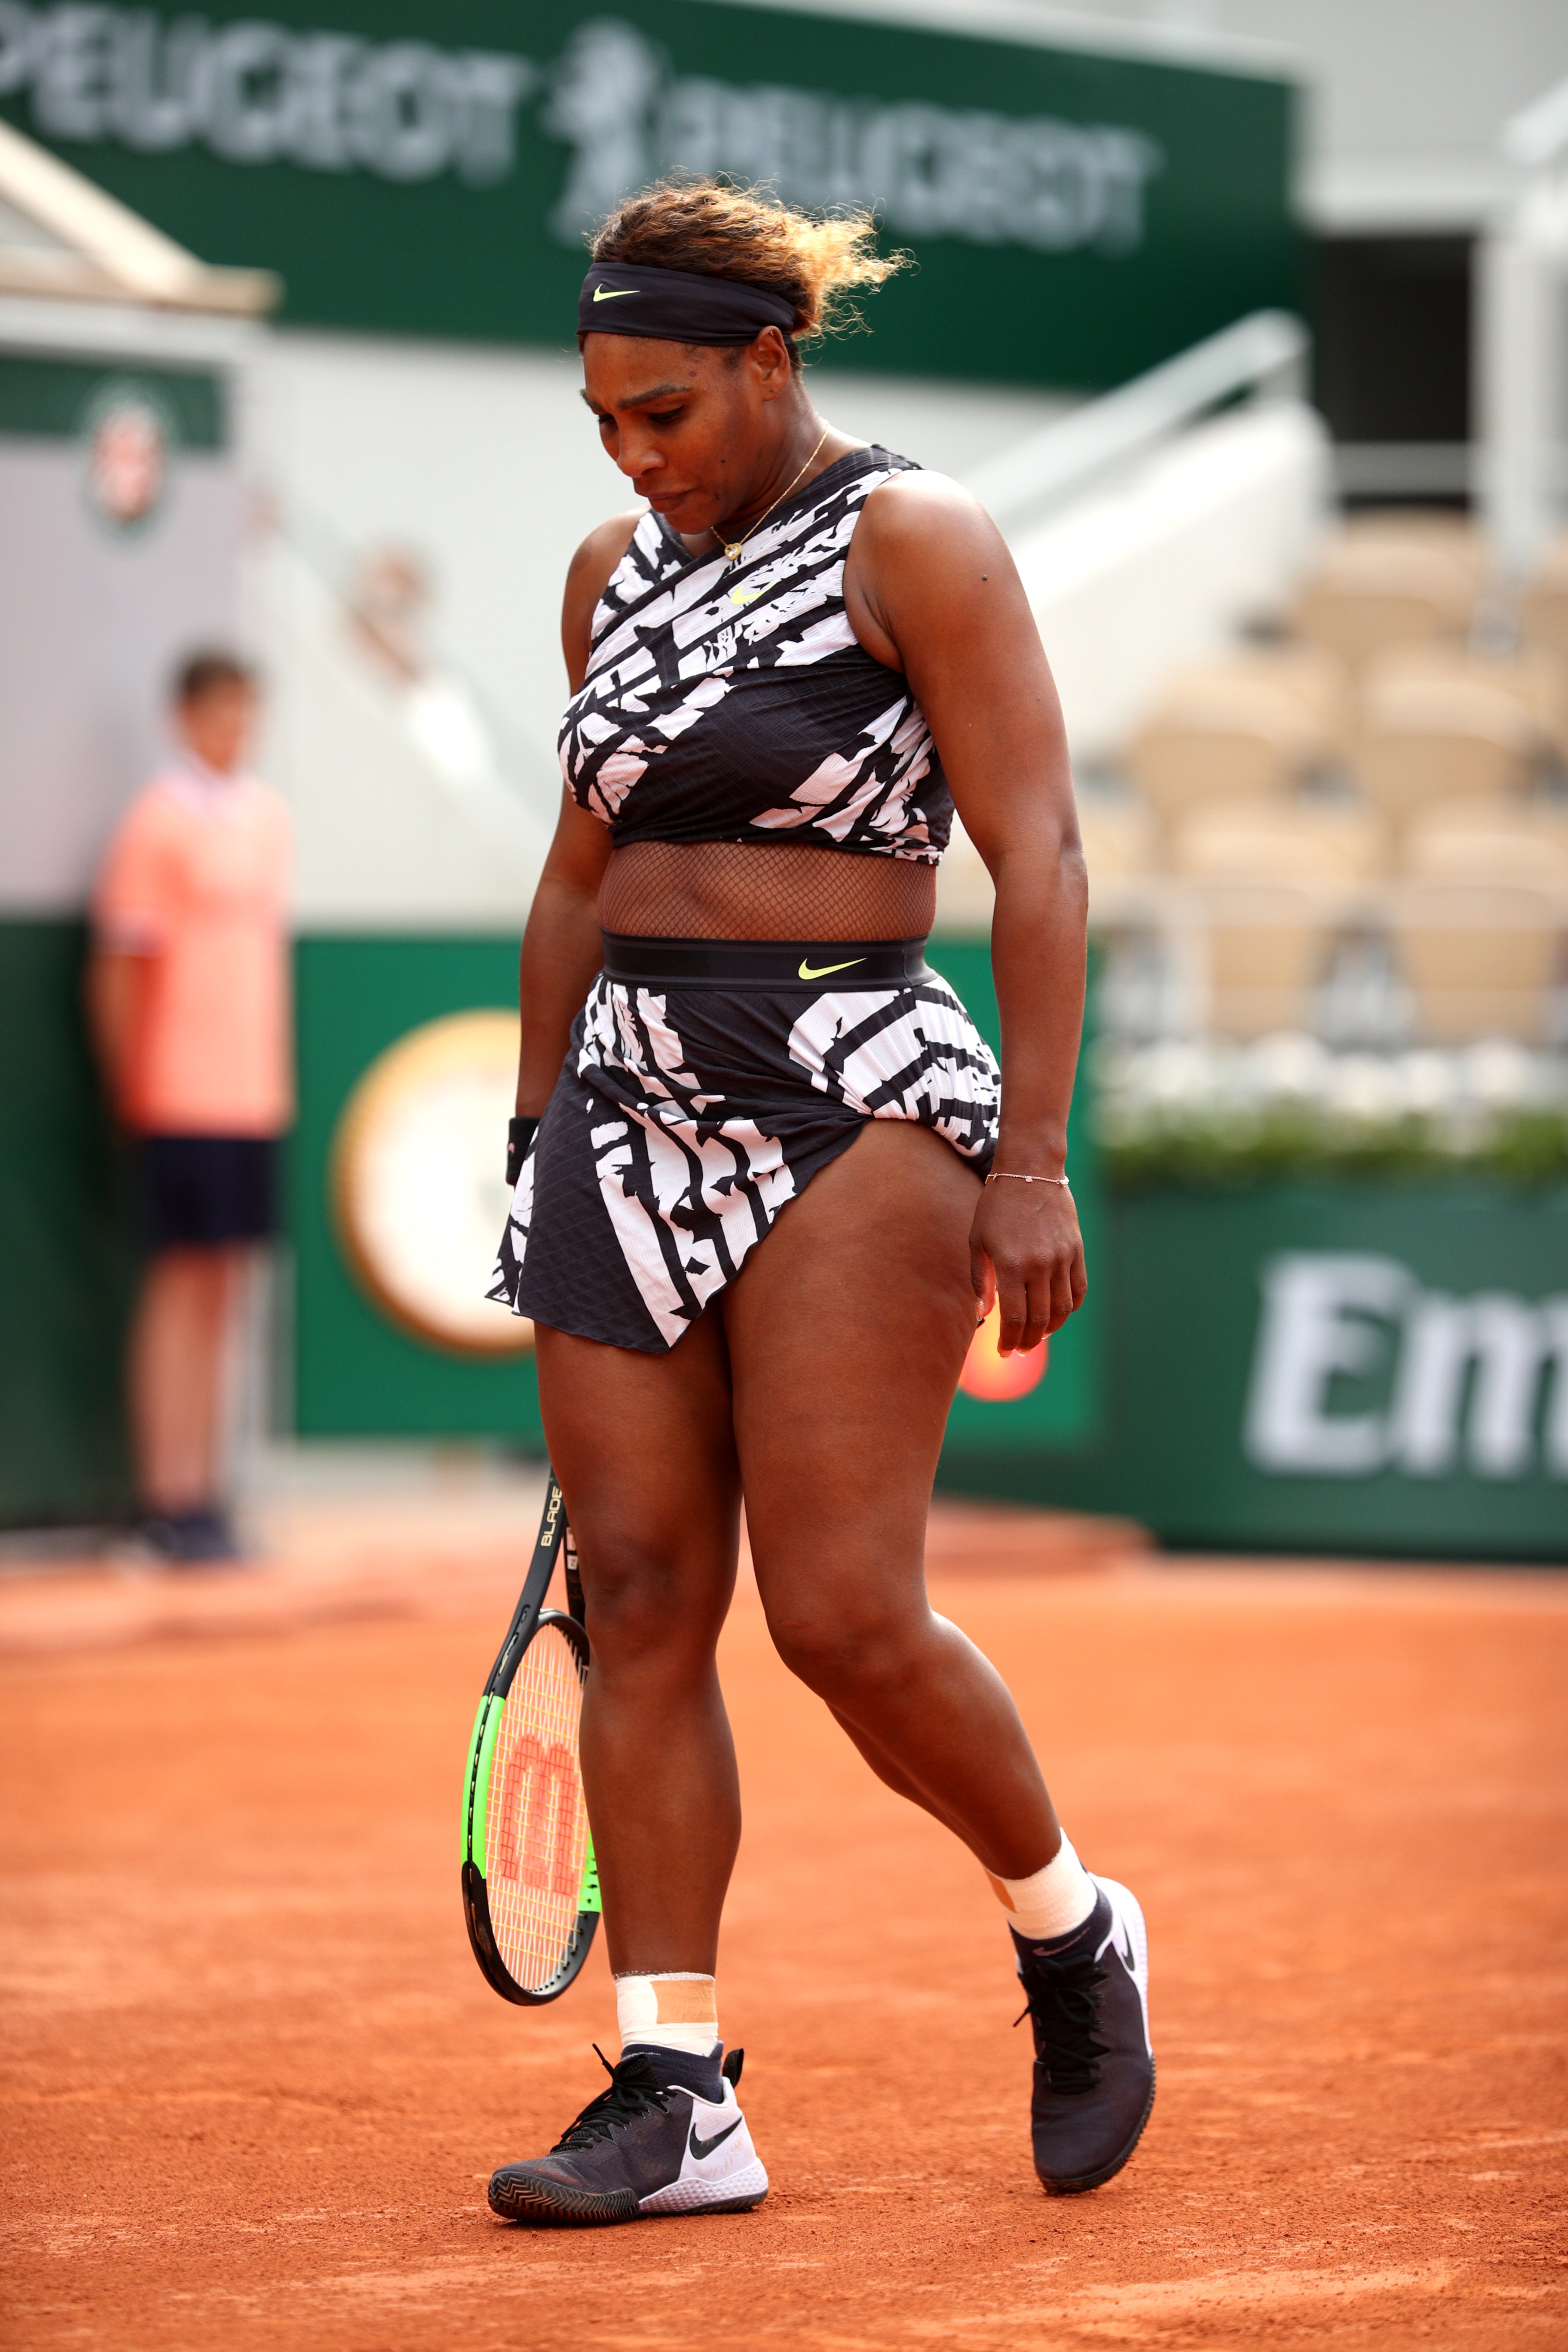 Serena Williams at the 2019 French Open at Roland Garros on May 27, 2019 in Paris, France | Photo: Getty Images